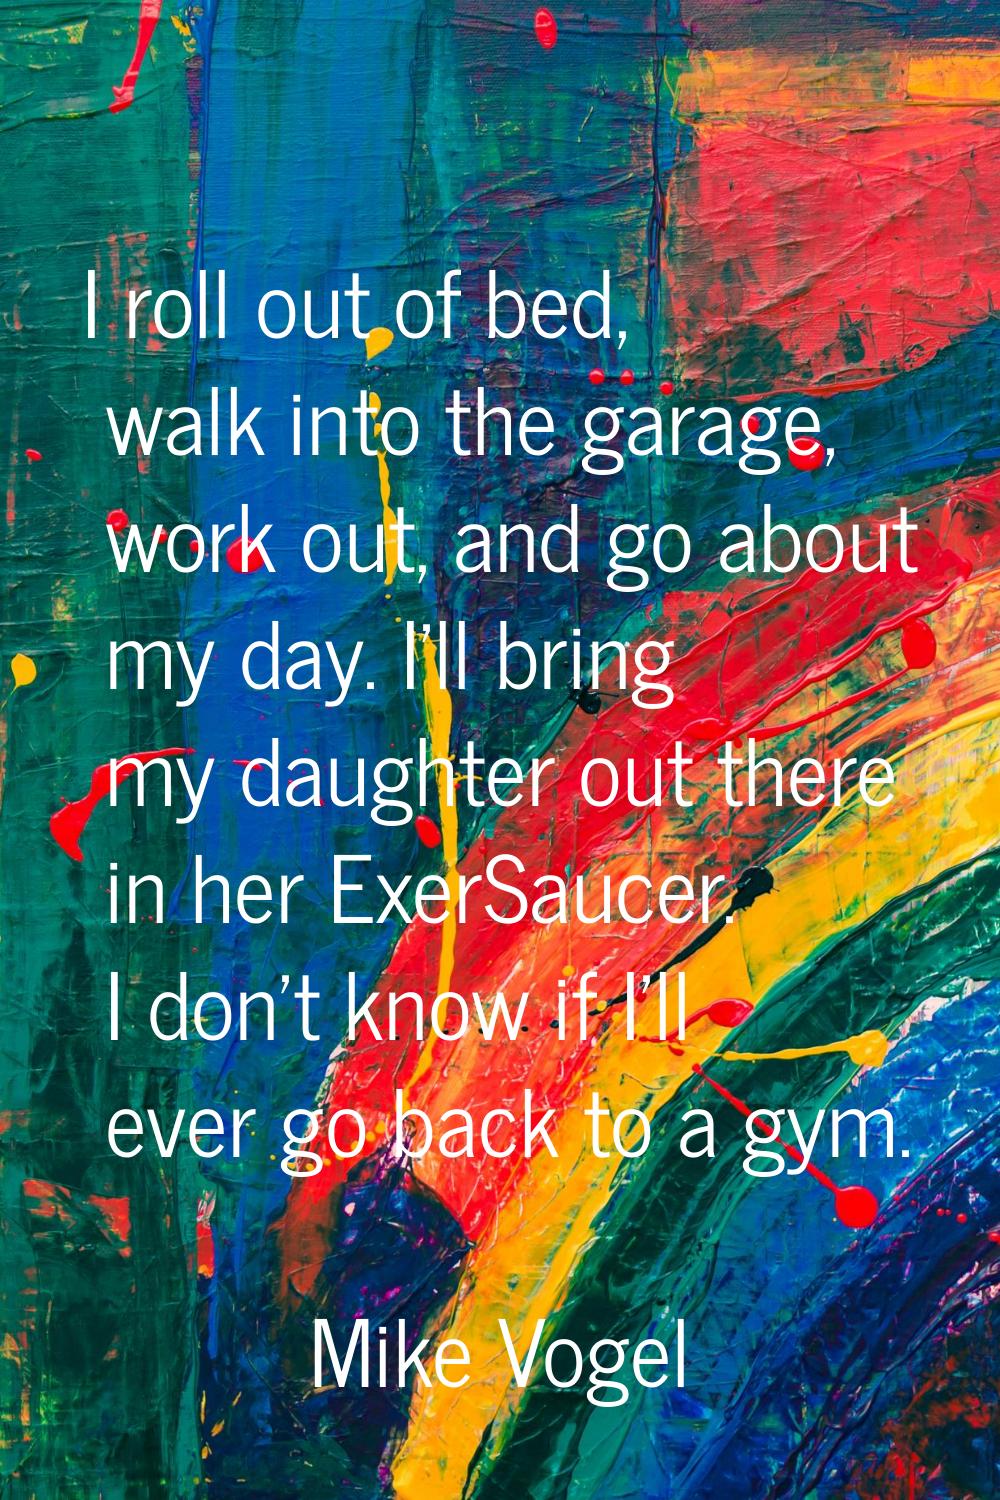 I roll out of bed, walk into the garage, work out, and go about my day. I'll bring my daughter out 